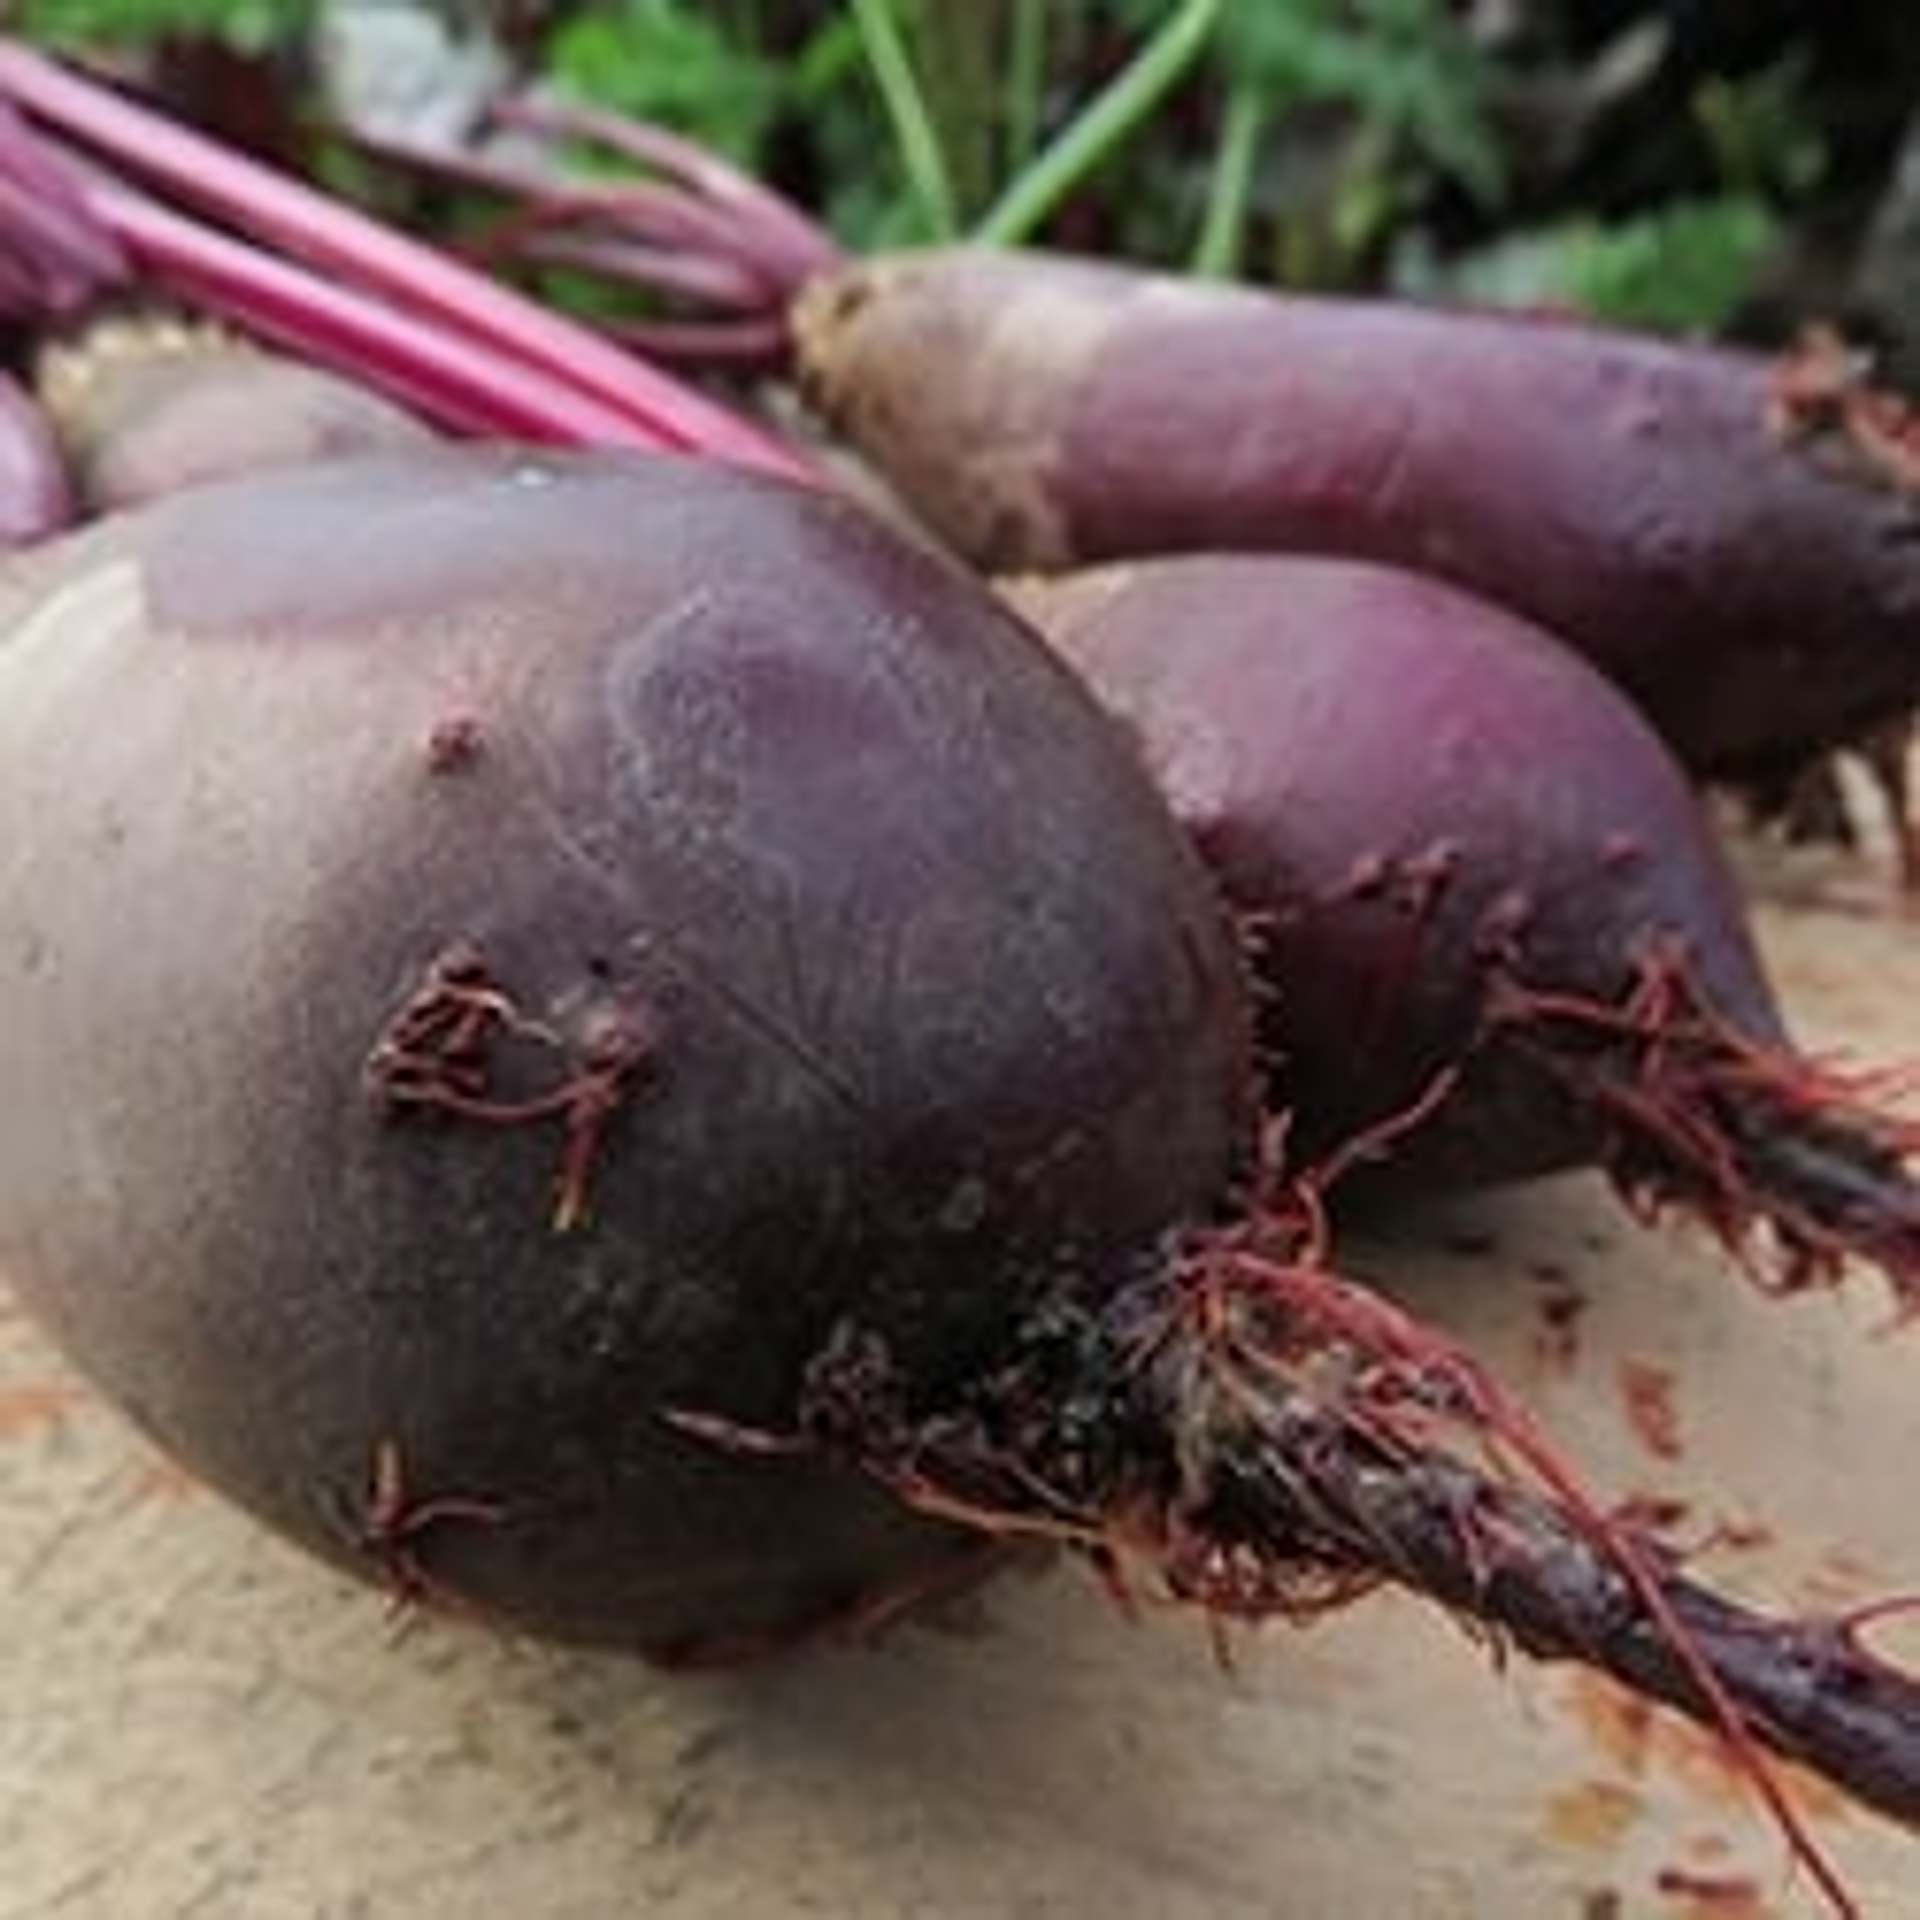 Buying Beetroot - What you should know